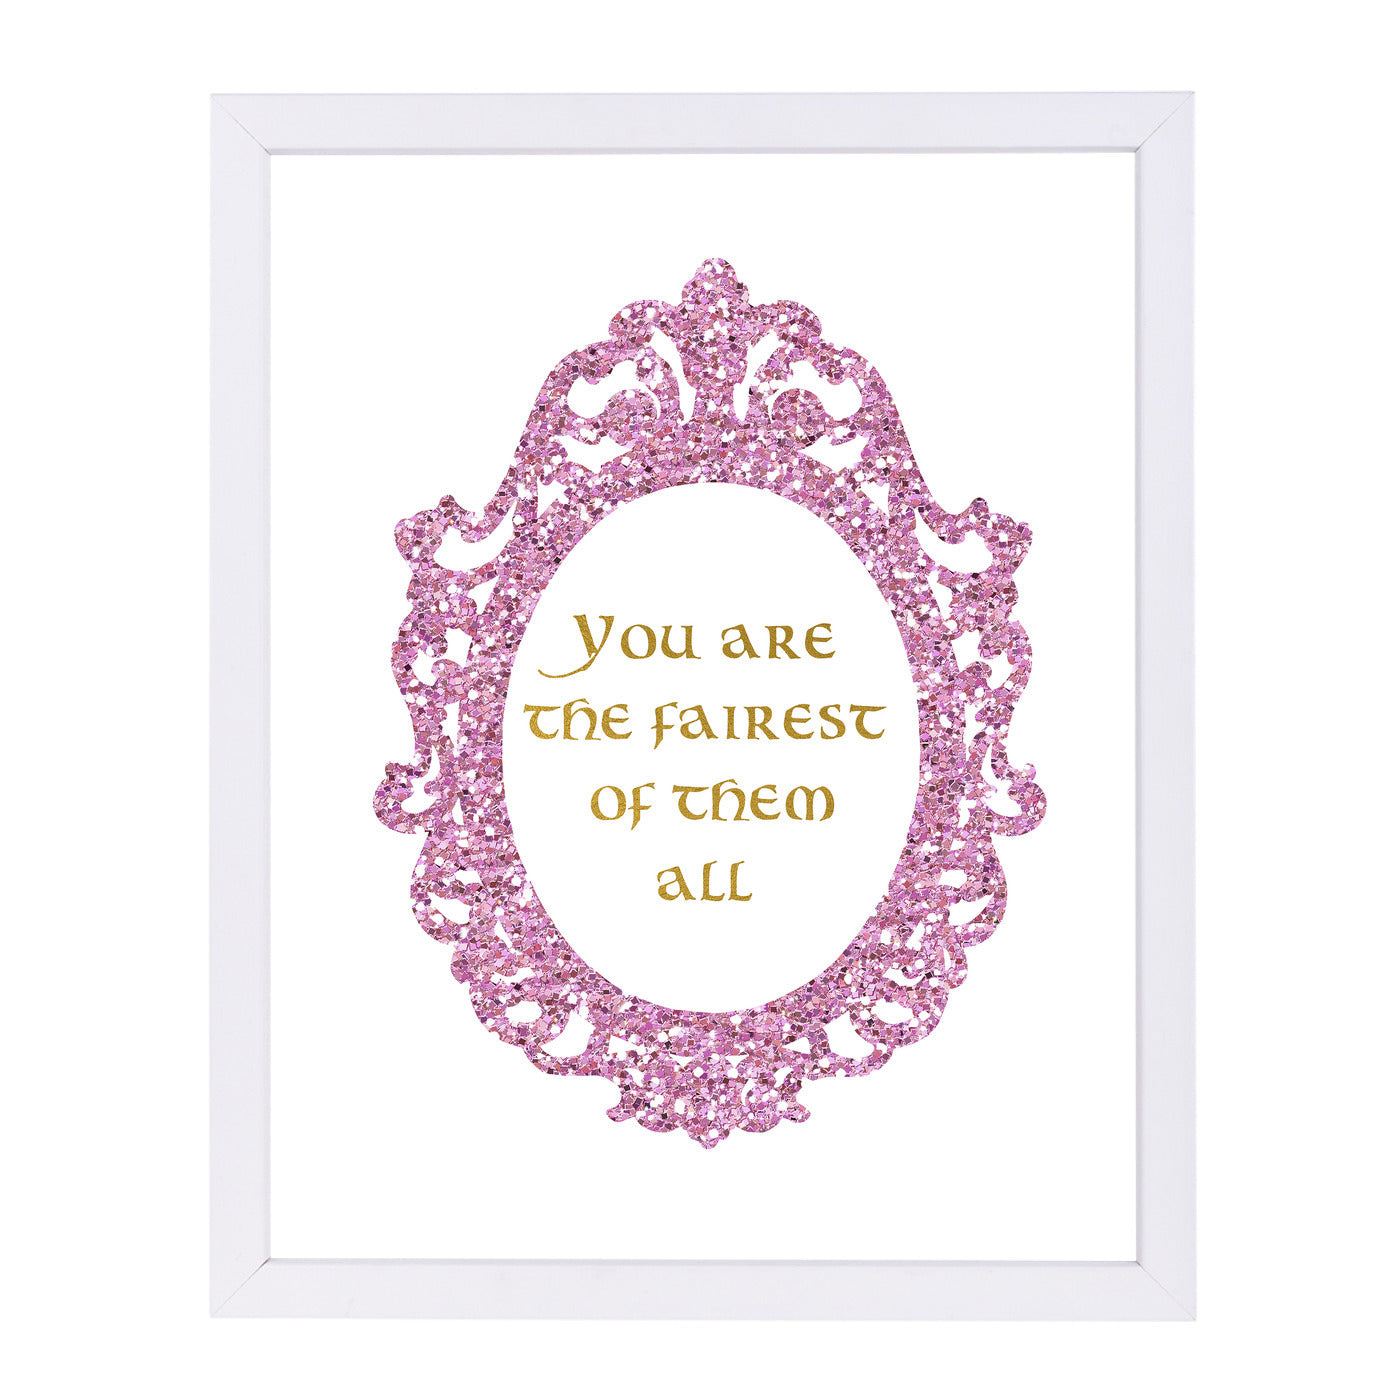 You Are the Fairest of Them All by Peach & Gold Framed Print - Americanflat